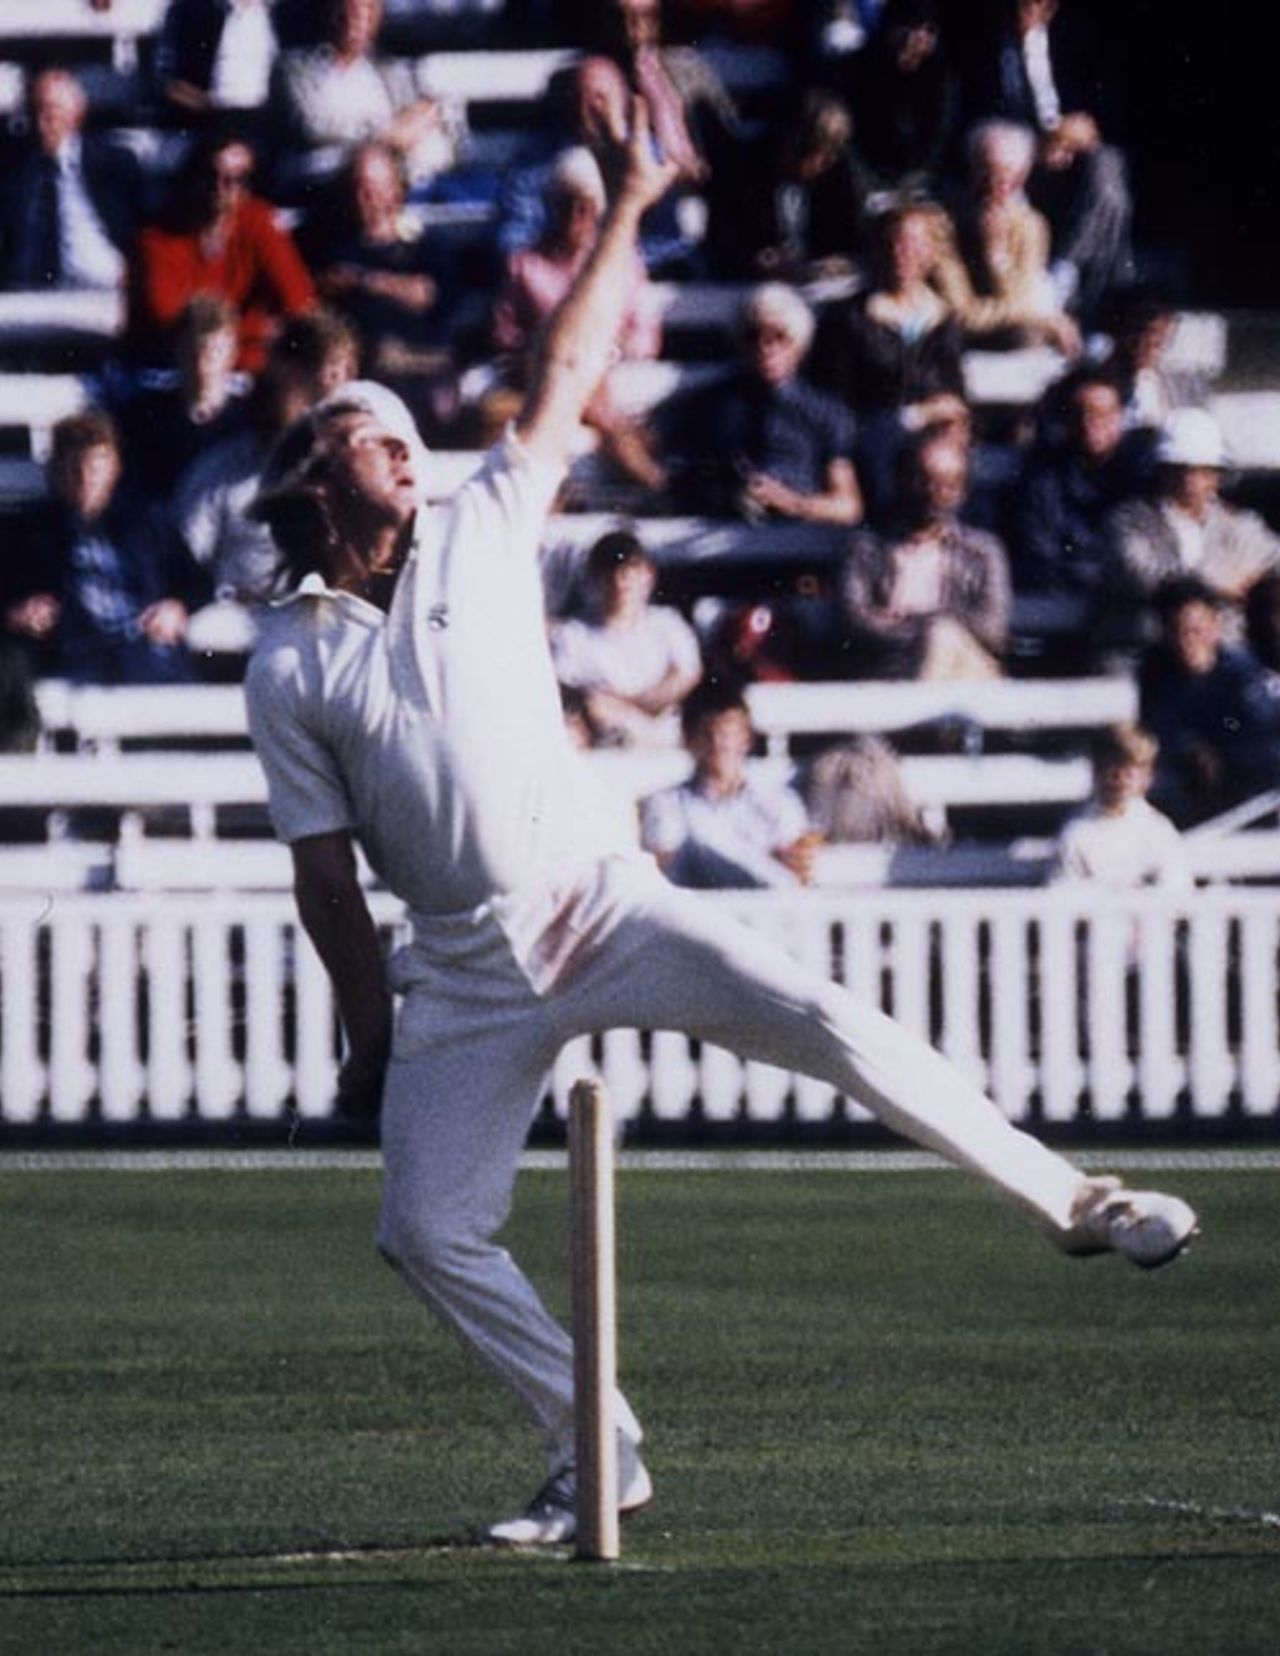 Jeff Thomson ready to unleash a thunderbolt, Middlesex v Australians, Lord's, July 1985